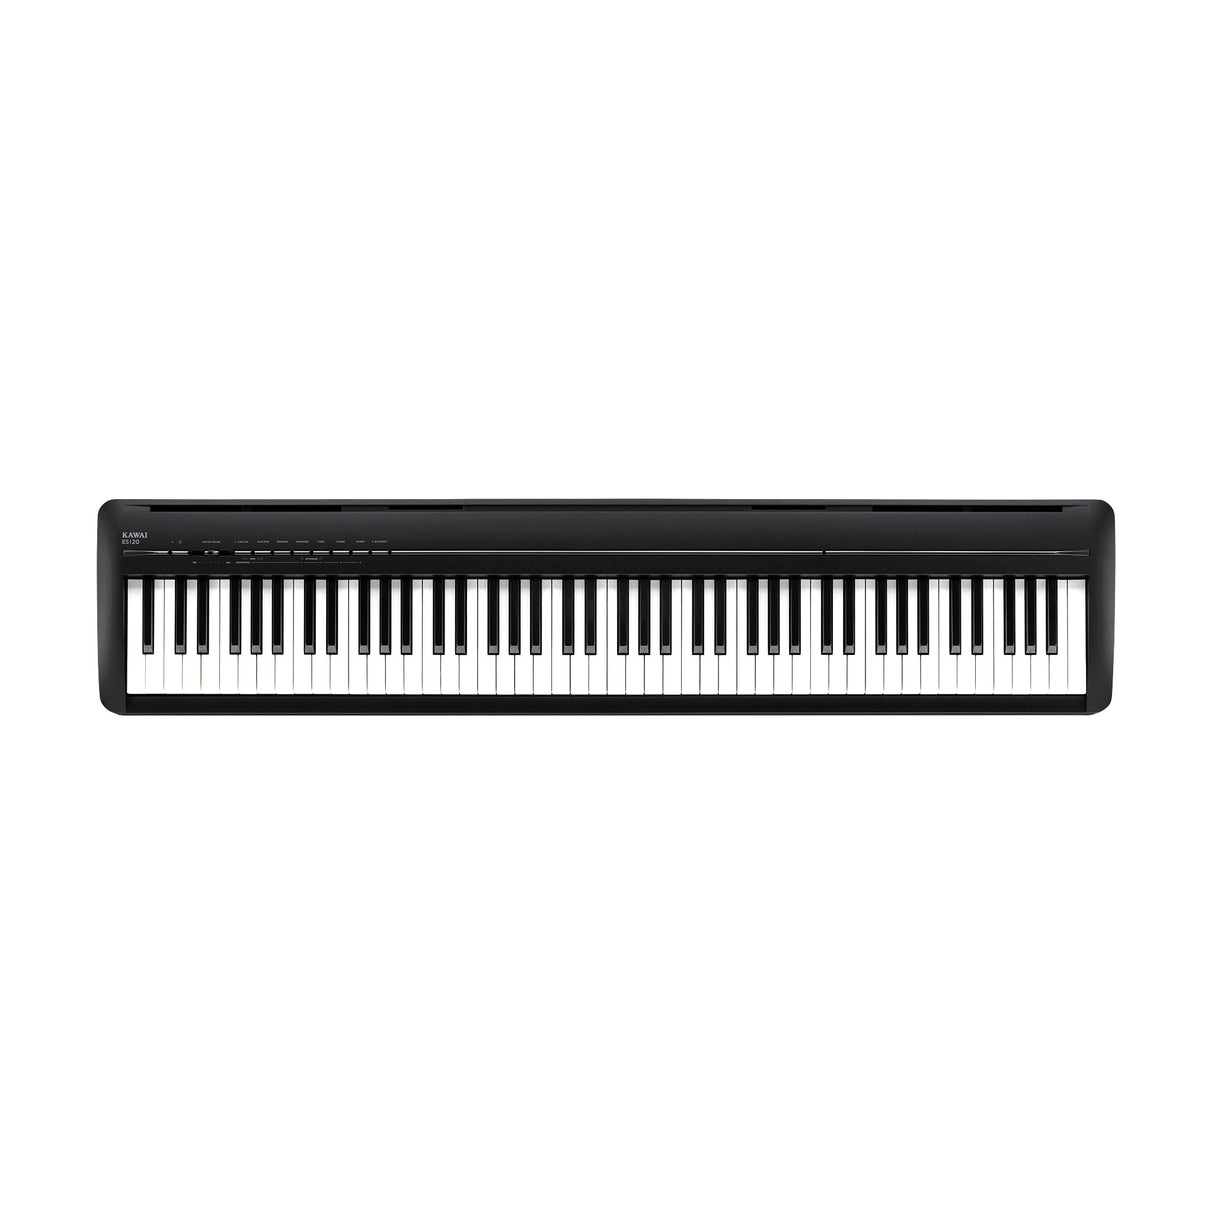 Kawai ES120 88-Key Digital Piano with Music Rest and Speakers, Contemporary Black